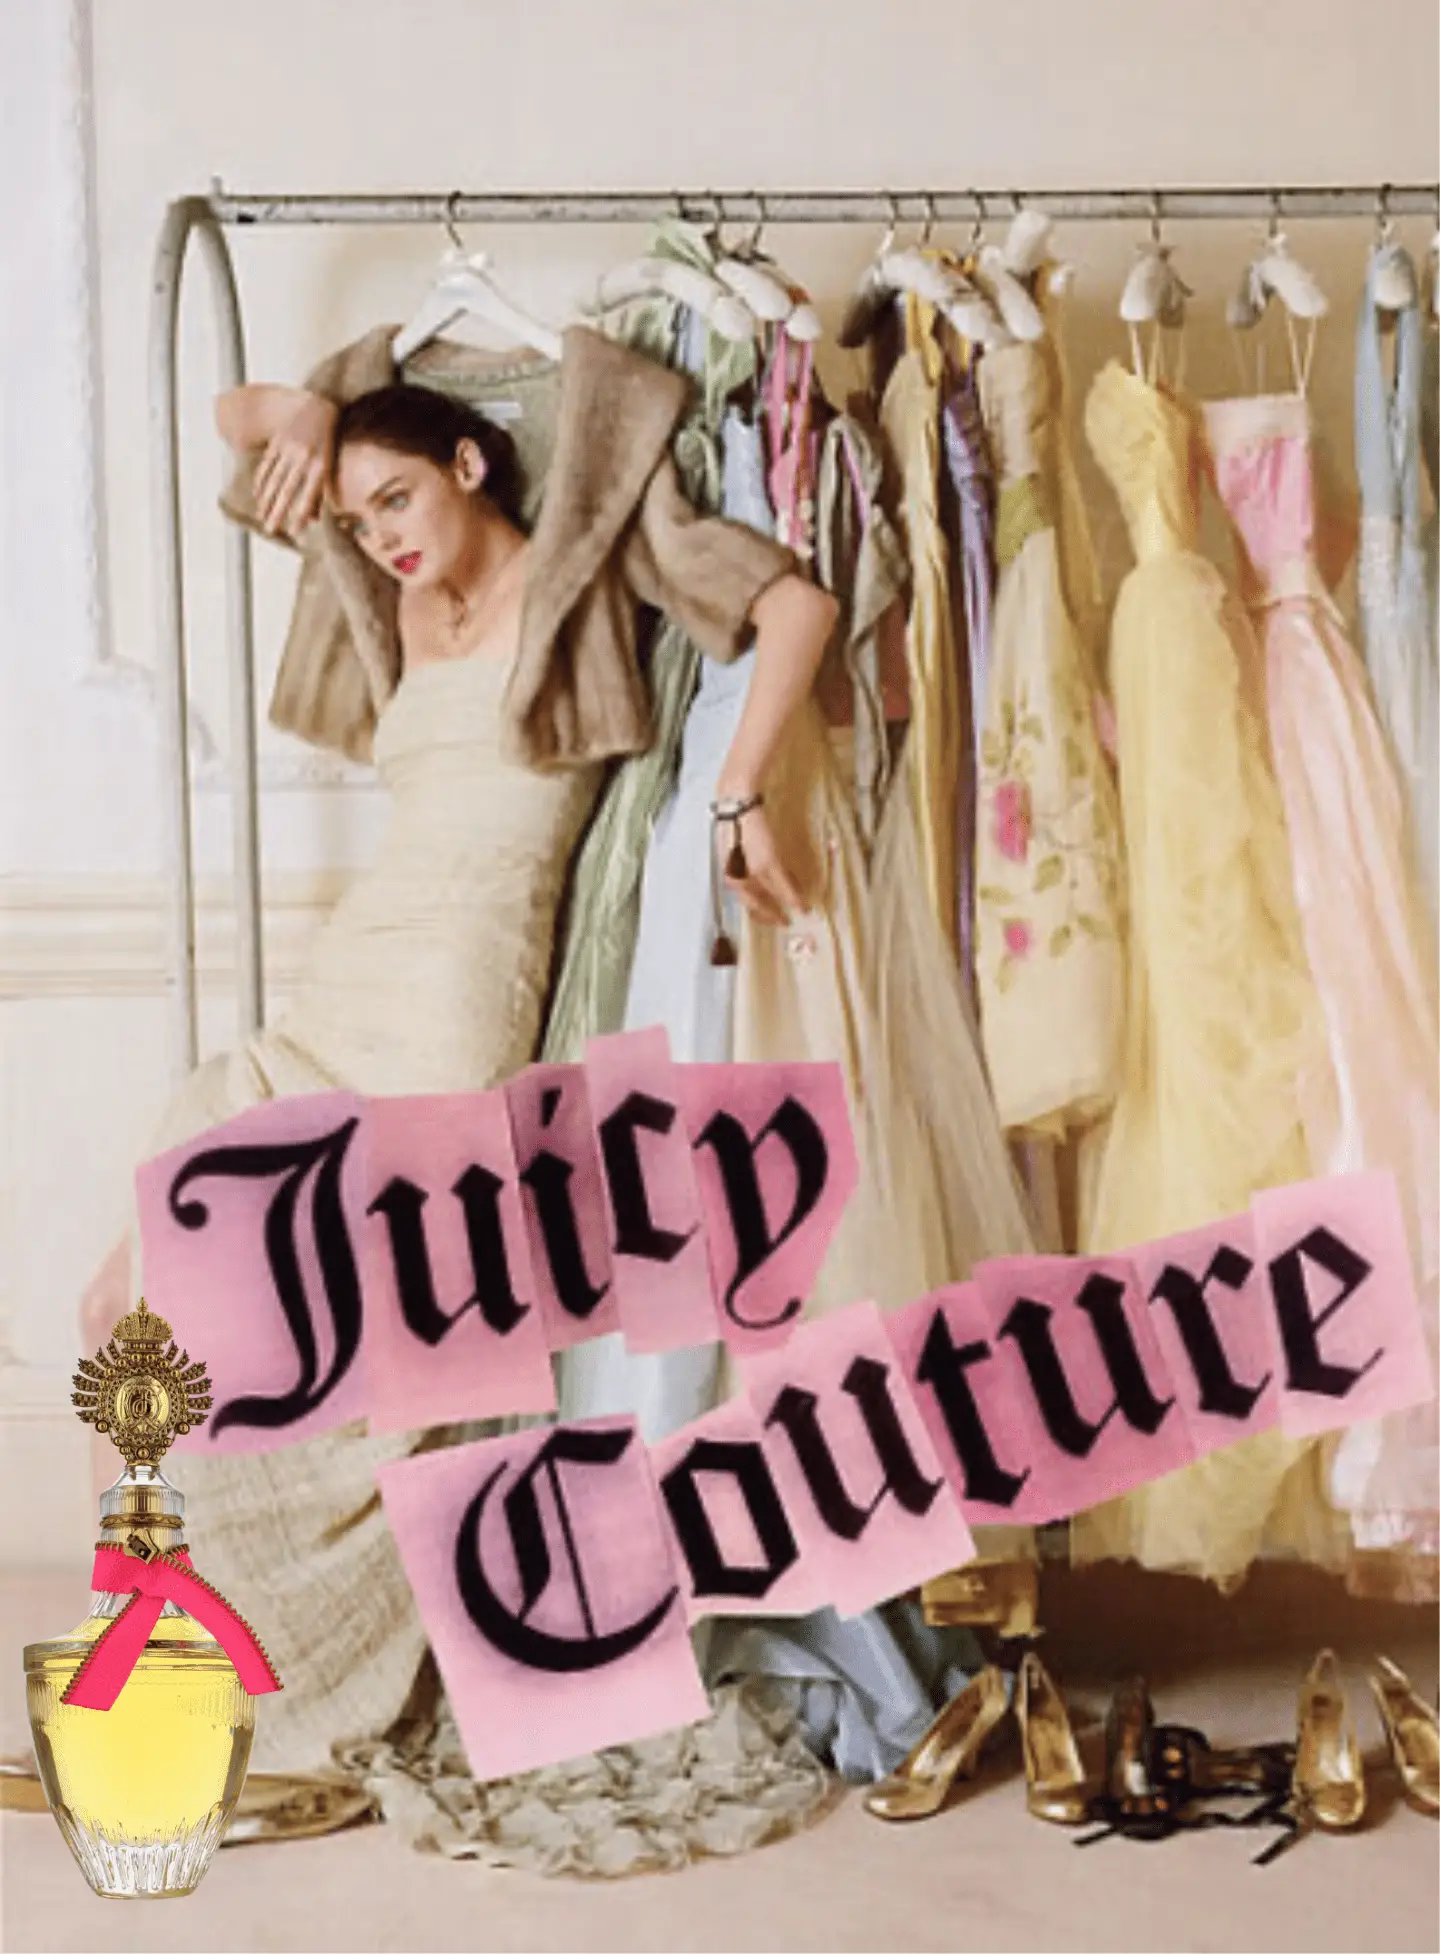 Juicy Couture, Couture Couture 最佳李子香水